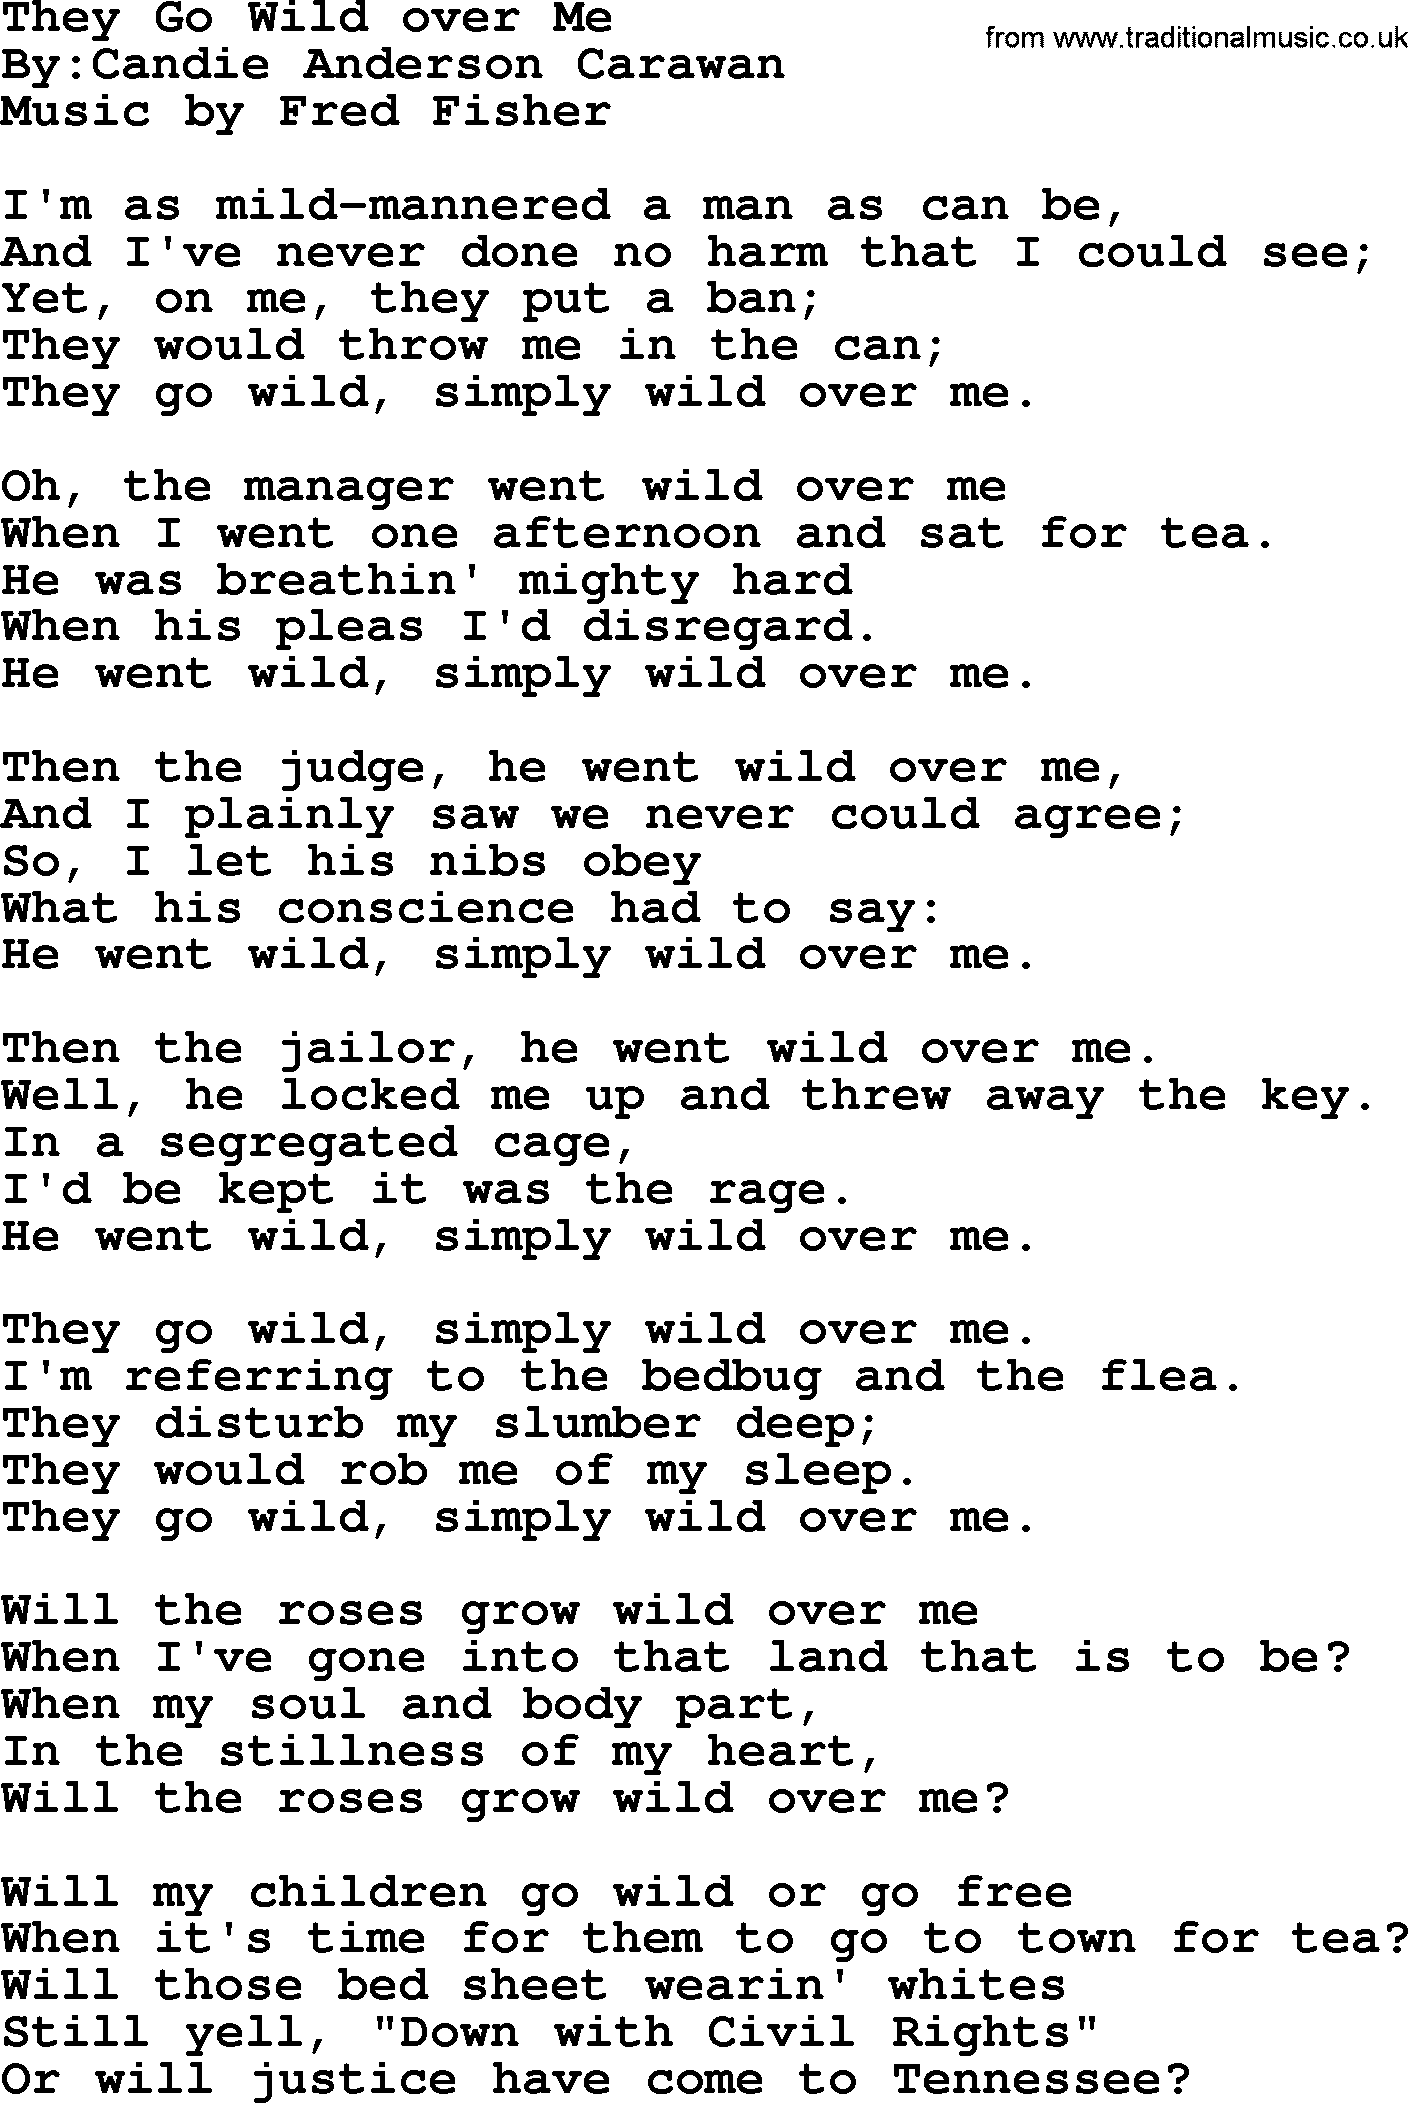 Political, Solidarity, Workers or Union song: They Go Wild Over Me, lyrics